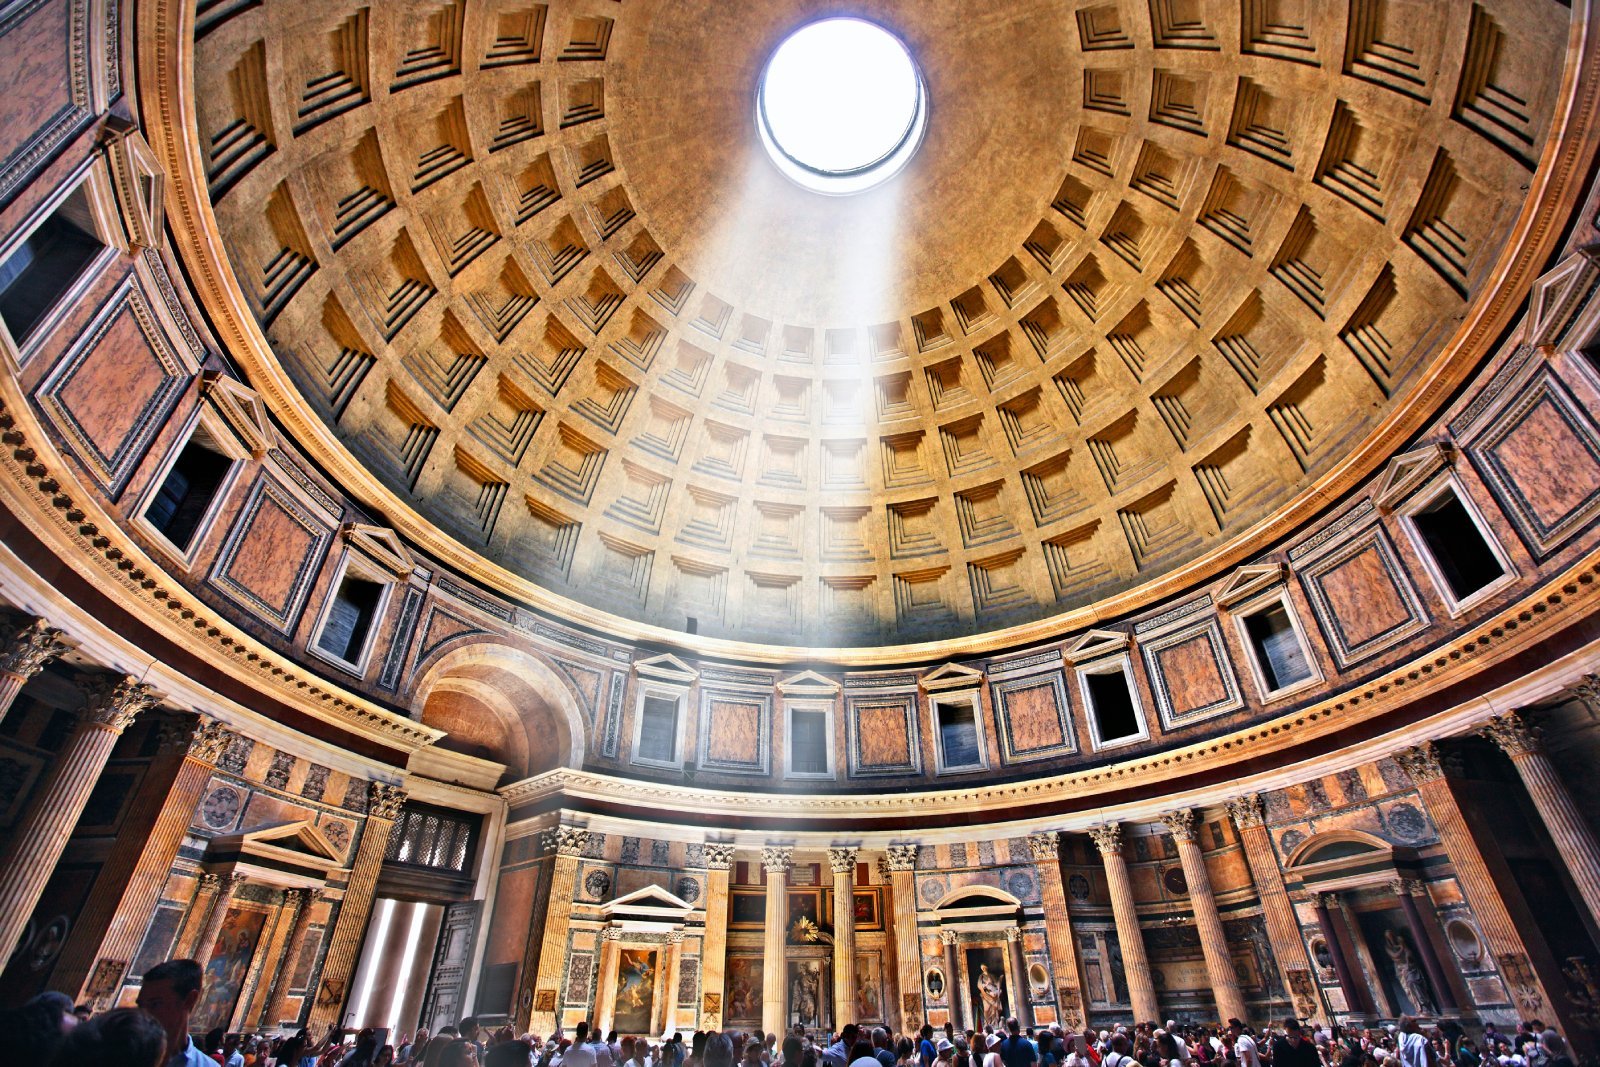 <p><span>The Pantheon, an impressive feat of ancient Roman architecture, is known for its perfectly proportioned dome, the largest unreinforced concrete dome in the world. Originally built as a temple to all gods, it now serves as a church and a tomb for notable figures, including the artist Raphael. The building’s harmonious proportions and the oculus, a circular opening at the dome’s apex, create a unique and awe-inspiring interior atmosphere.</span></p> <p><b>Insider’s Tip: </b><span>Visit on a rainy day to see the captivating sight of rain falling through the oculus and evaporating before it hits the ground.</span></p> <p><b>How To Get There: </b><span>The Pantheon is centrally located and best reached by foot from other nearby attractions like Piazza Navona.</span></p> <p><b>Best Time To Travel: </b><span>Early mornings or late afternoons are less crowded, offering a more serene experience.</span></p>